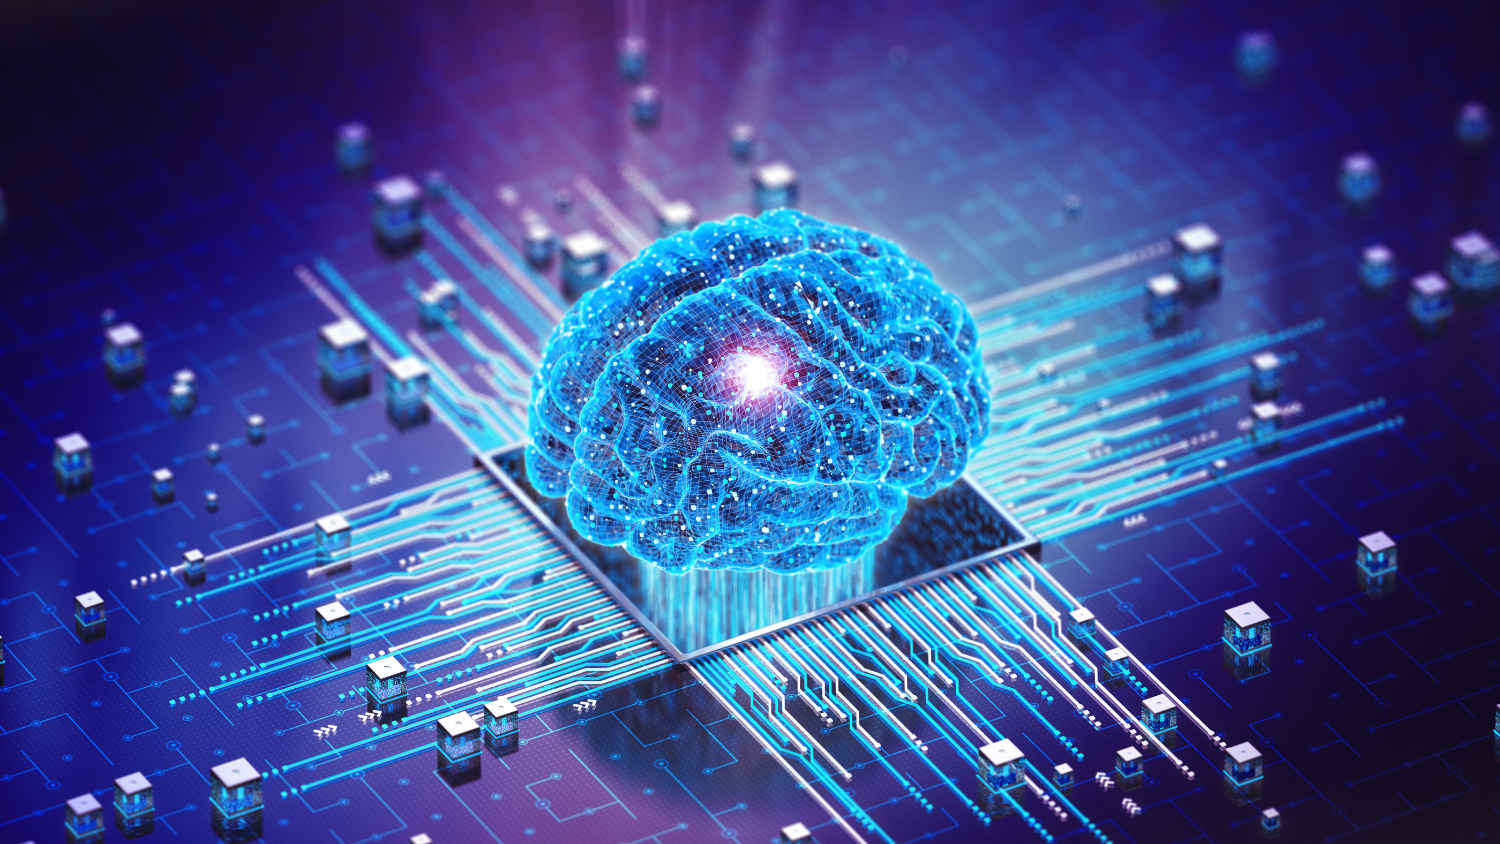 Meet Intel Hala Point, a brain-inspired neuromorphic system that solves for AI compute limitations